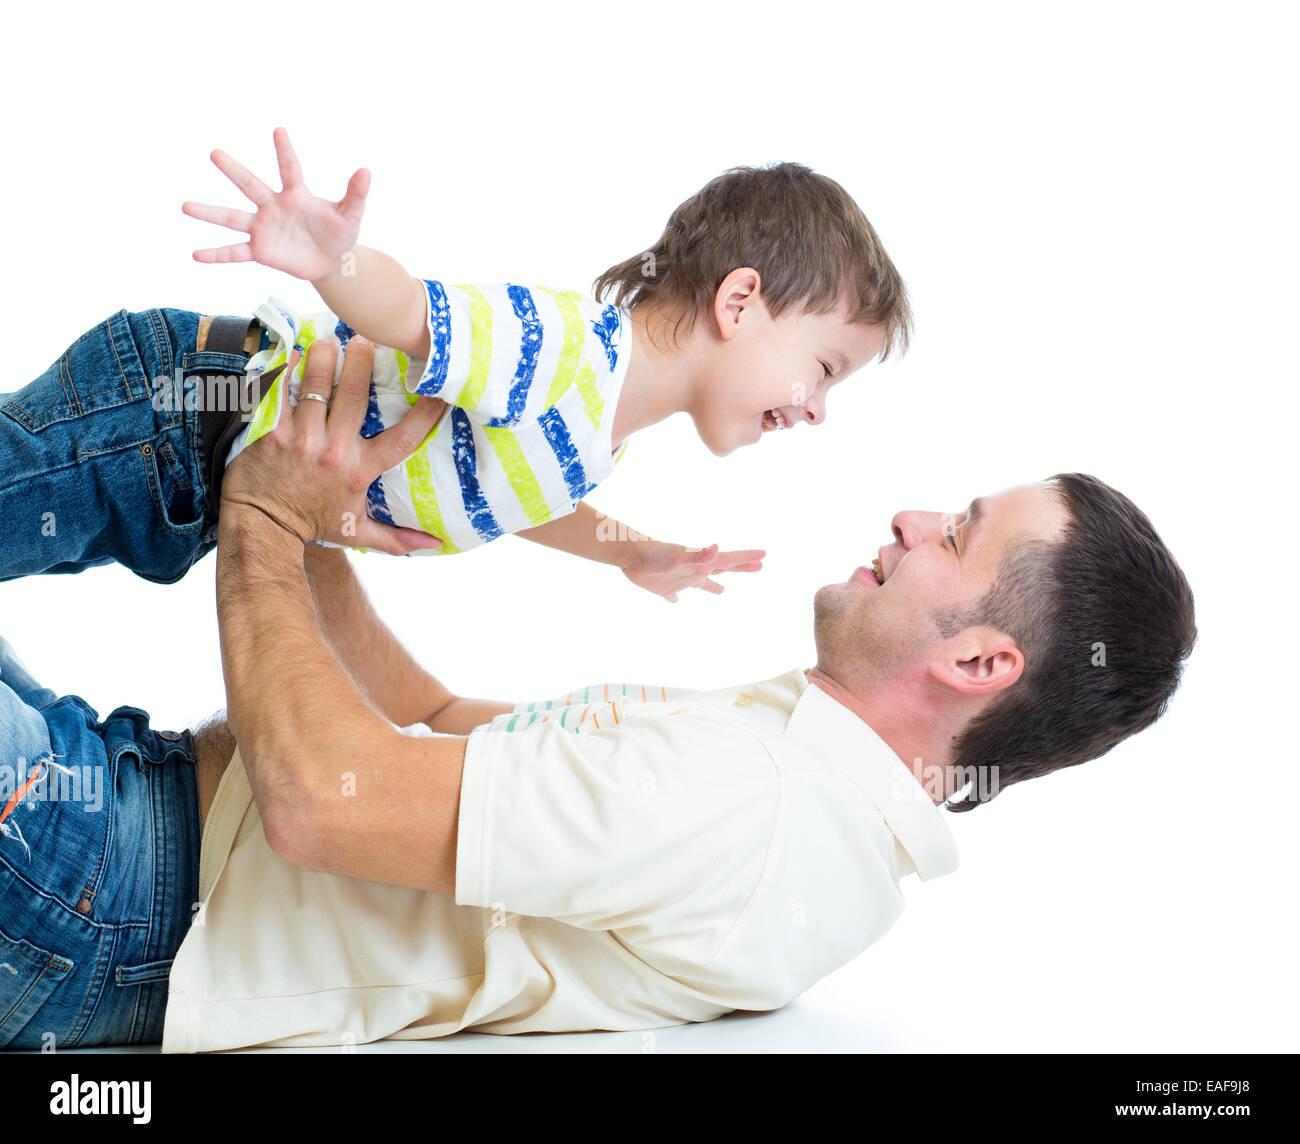 kid son and dad having fun pastime Stock Photo